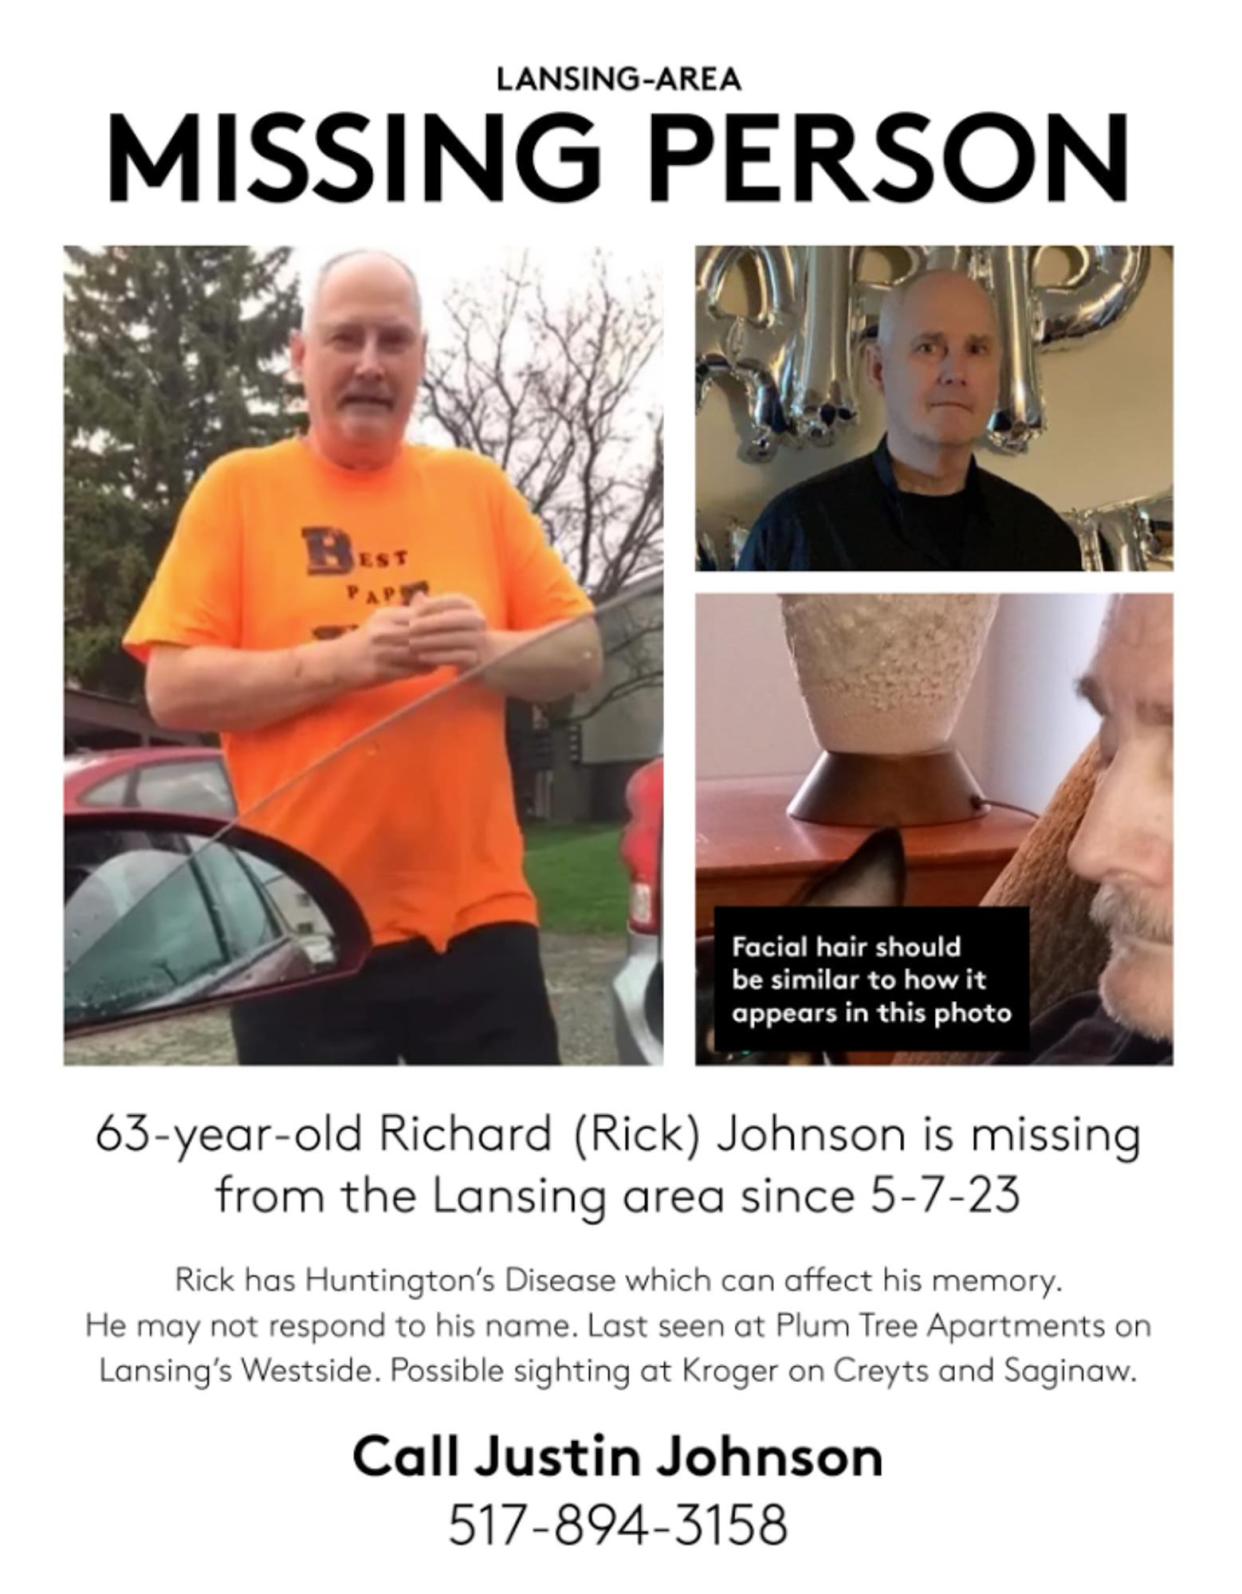 A missing person poster for Richard "Rick" Johnson, missing from the Lansing area since May 7, 2023.